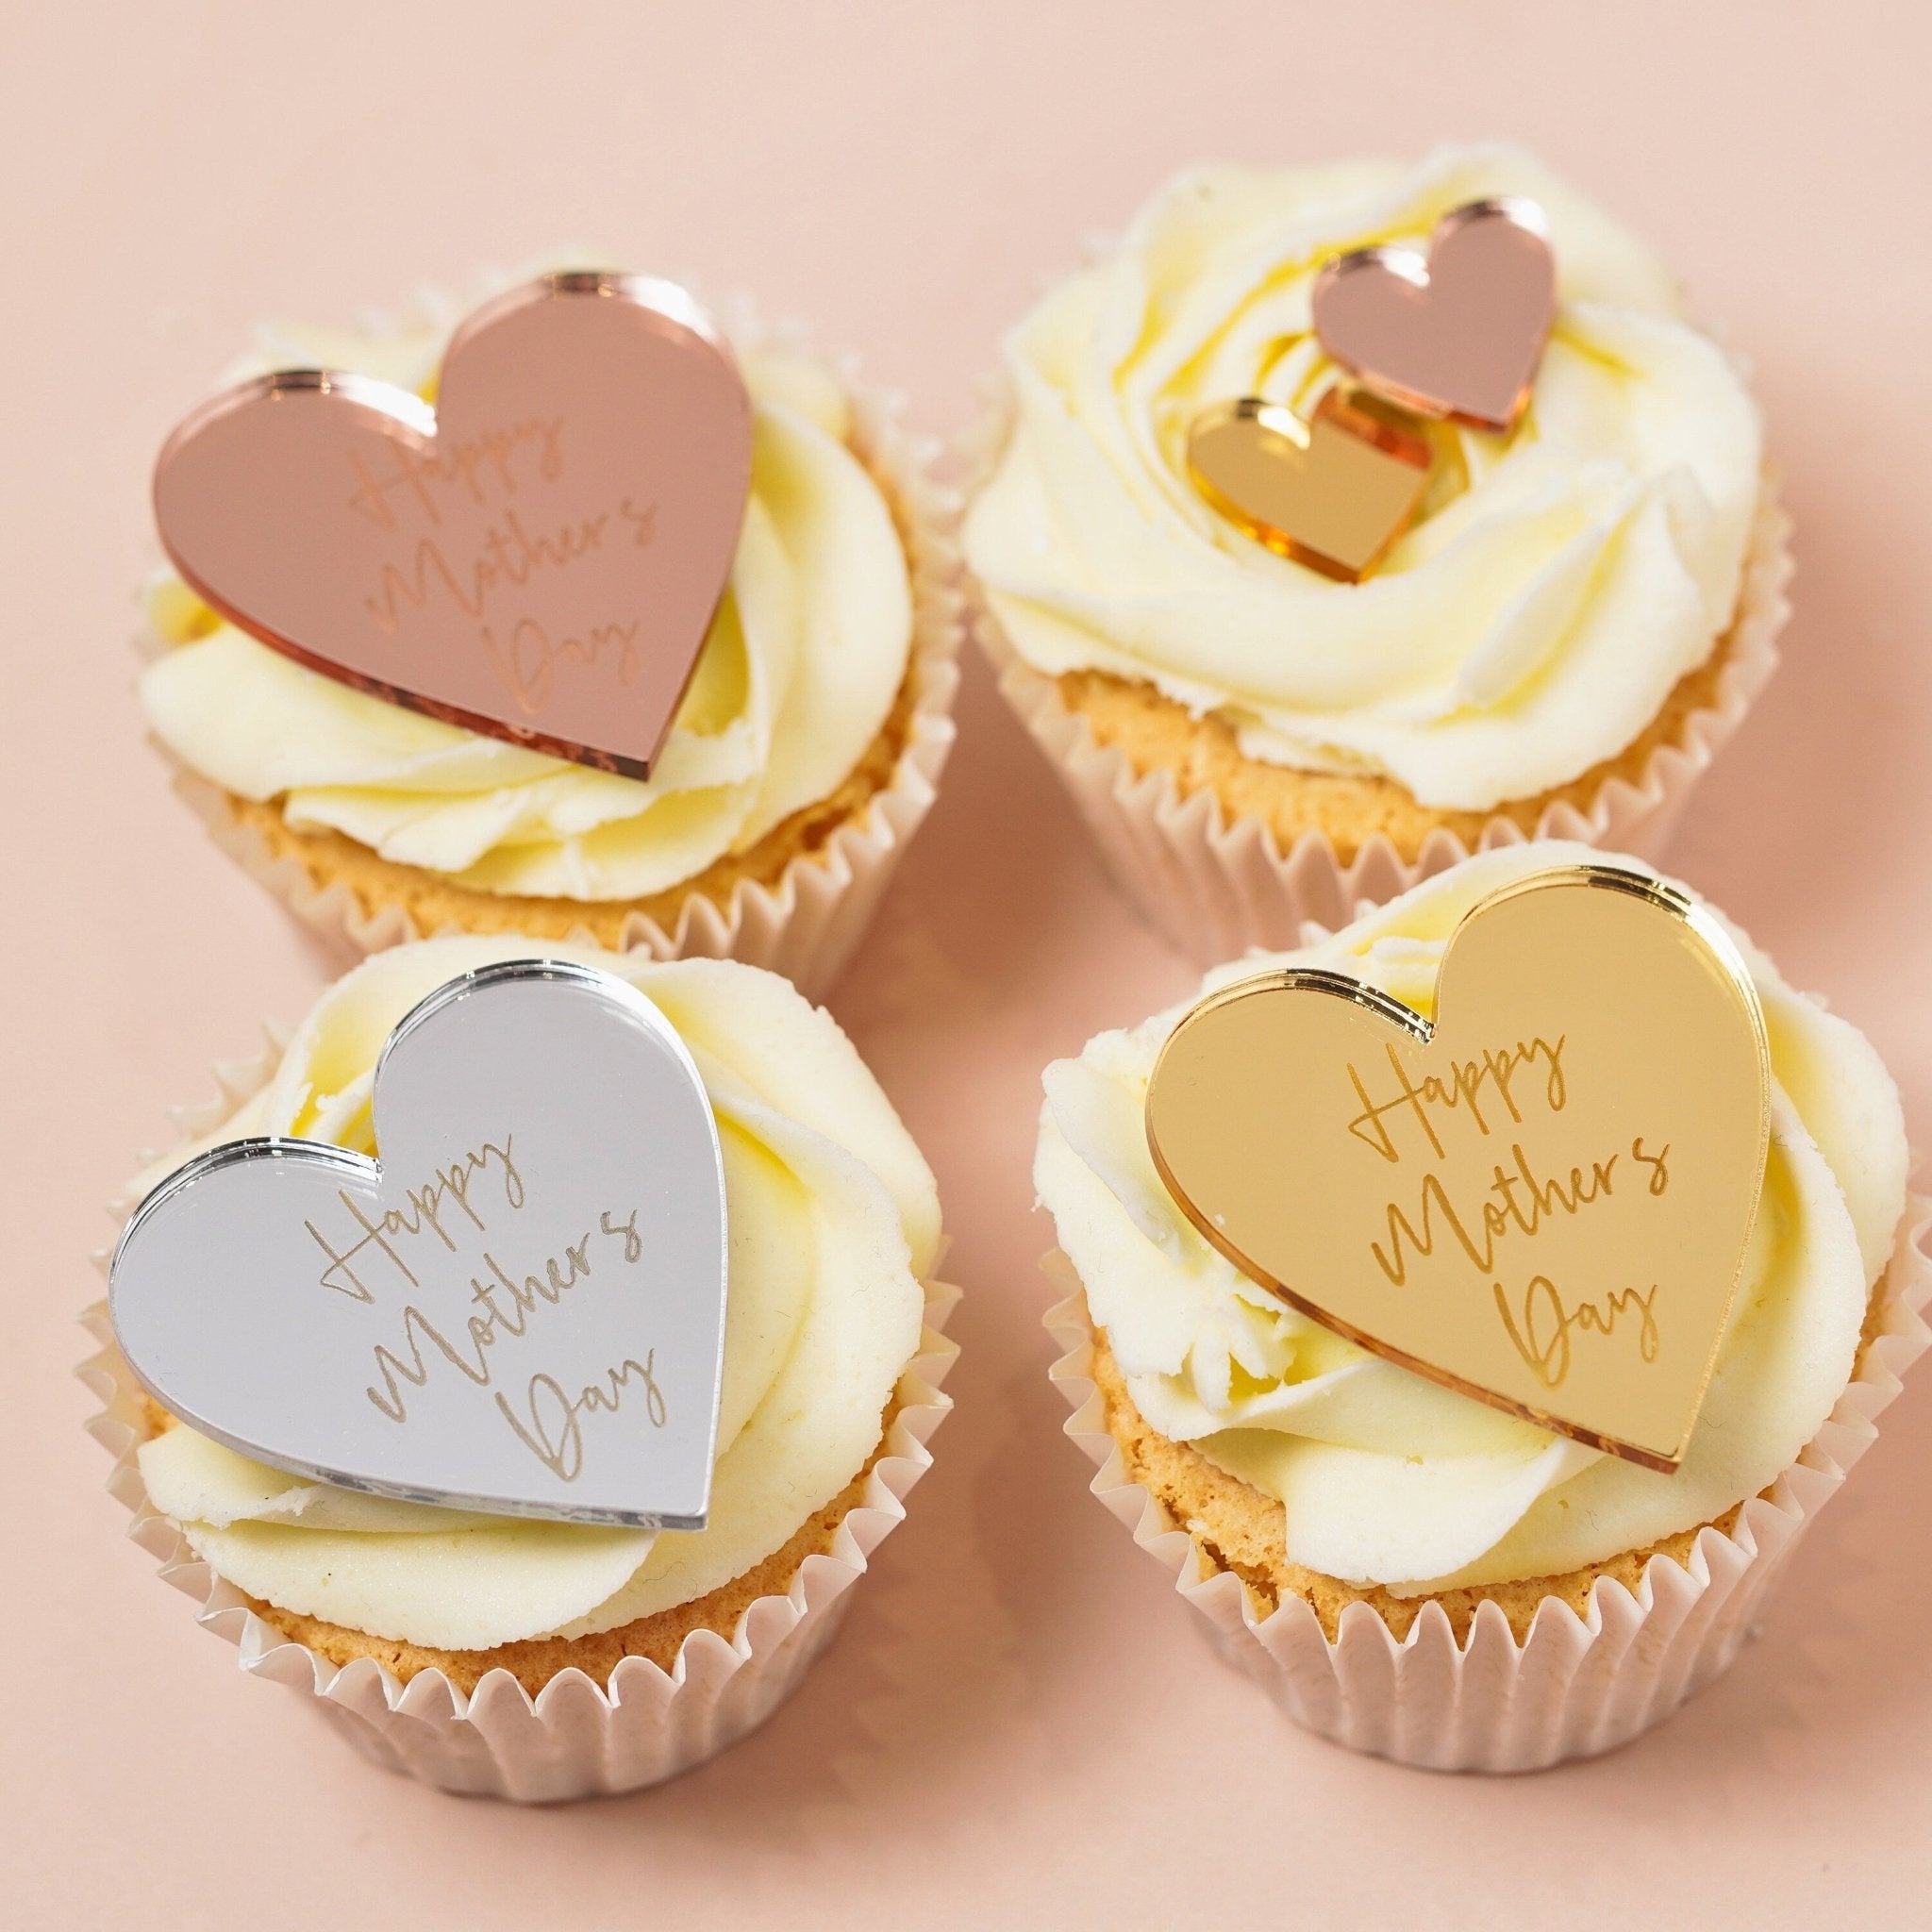 Happy Mothers Day cupcake topper